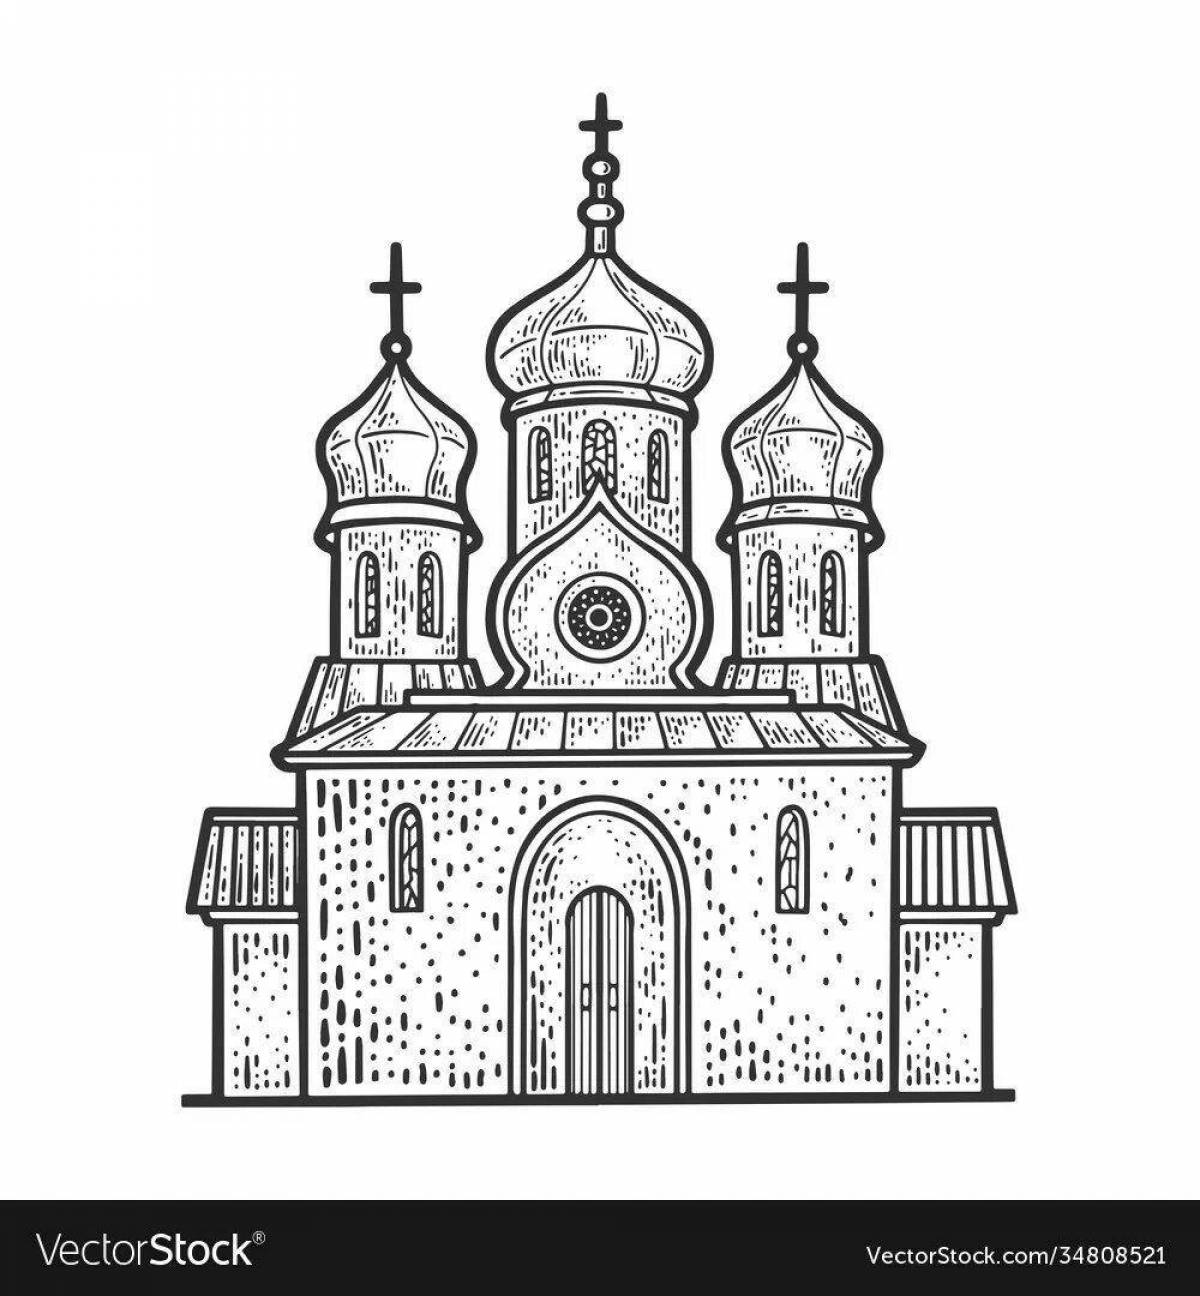 Shiny domed church coloring book